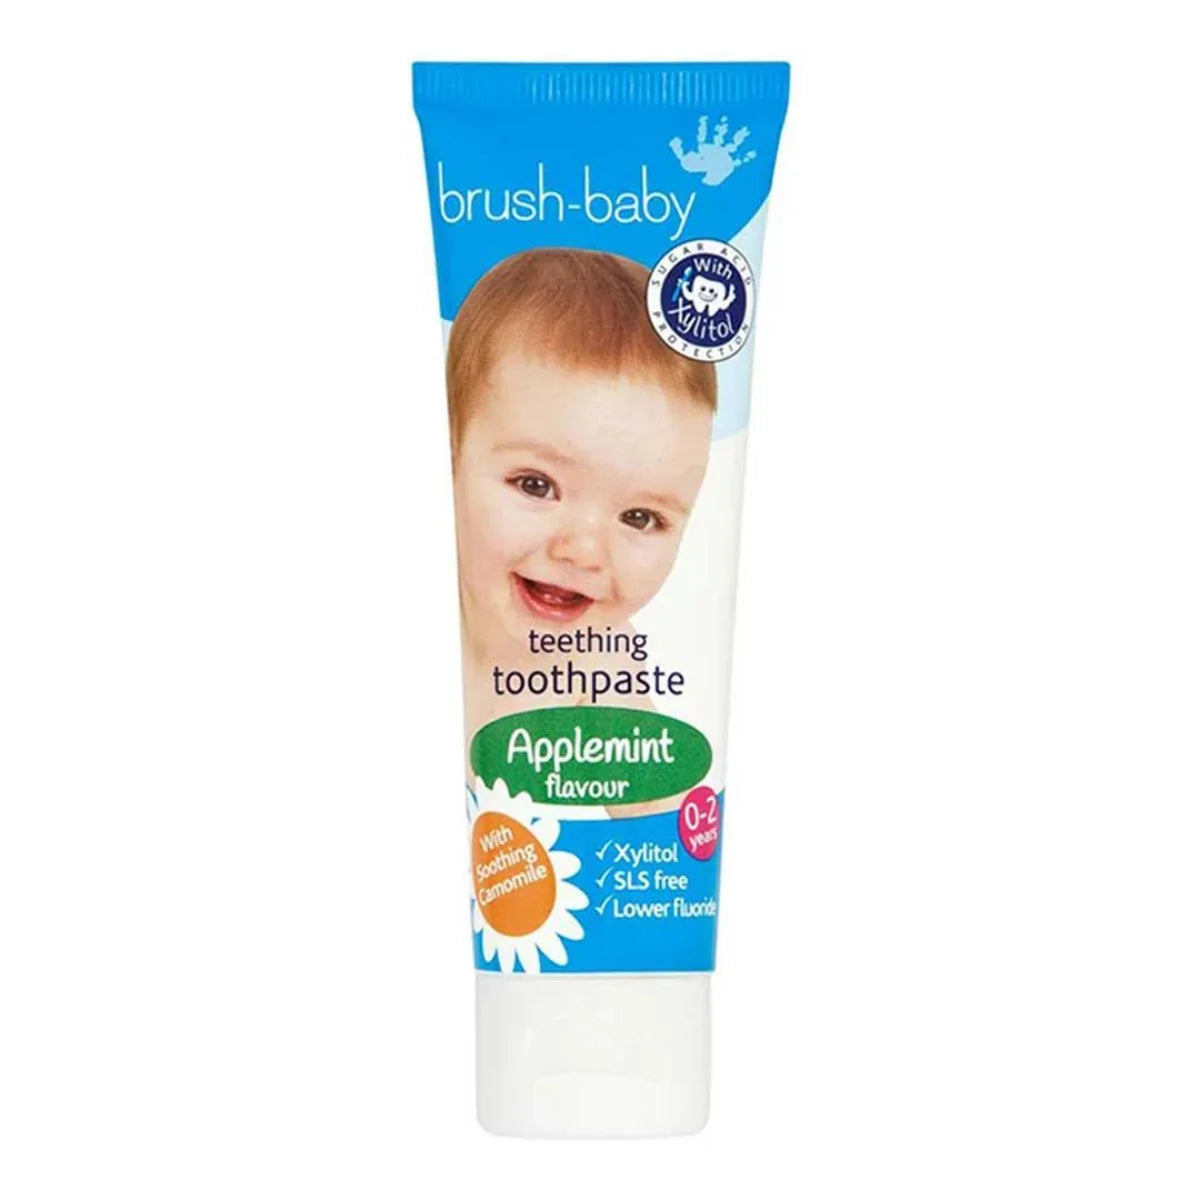 Brush-baby toothpaste for toddlers